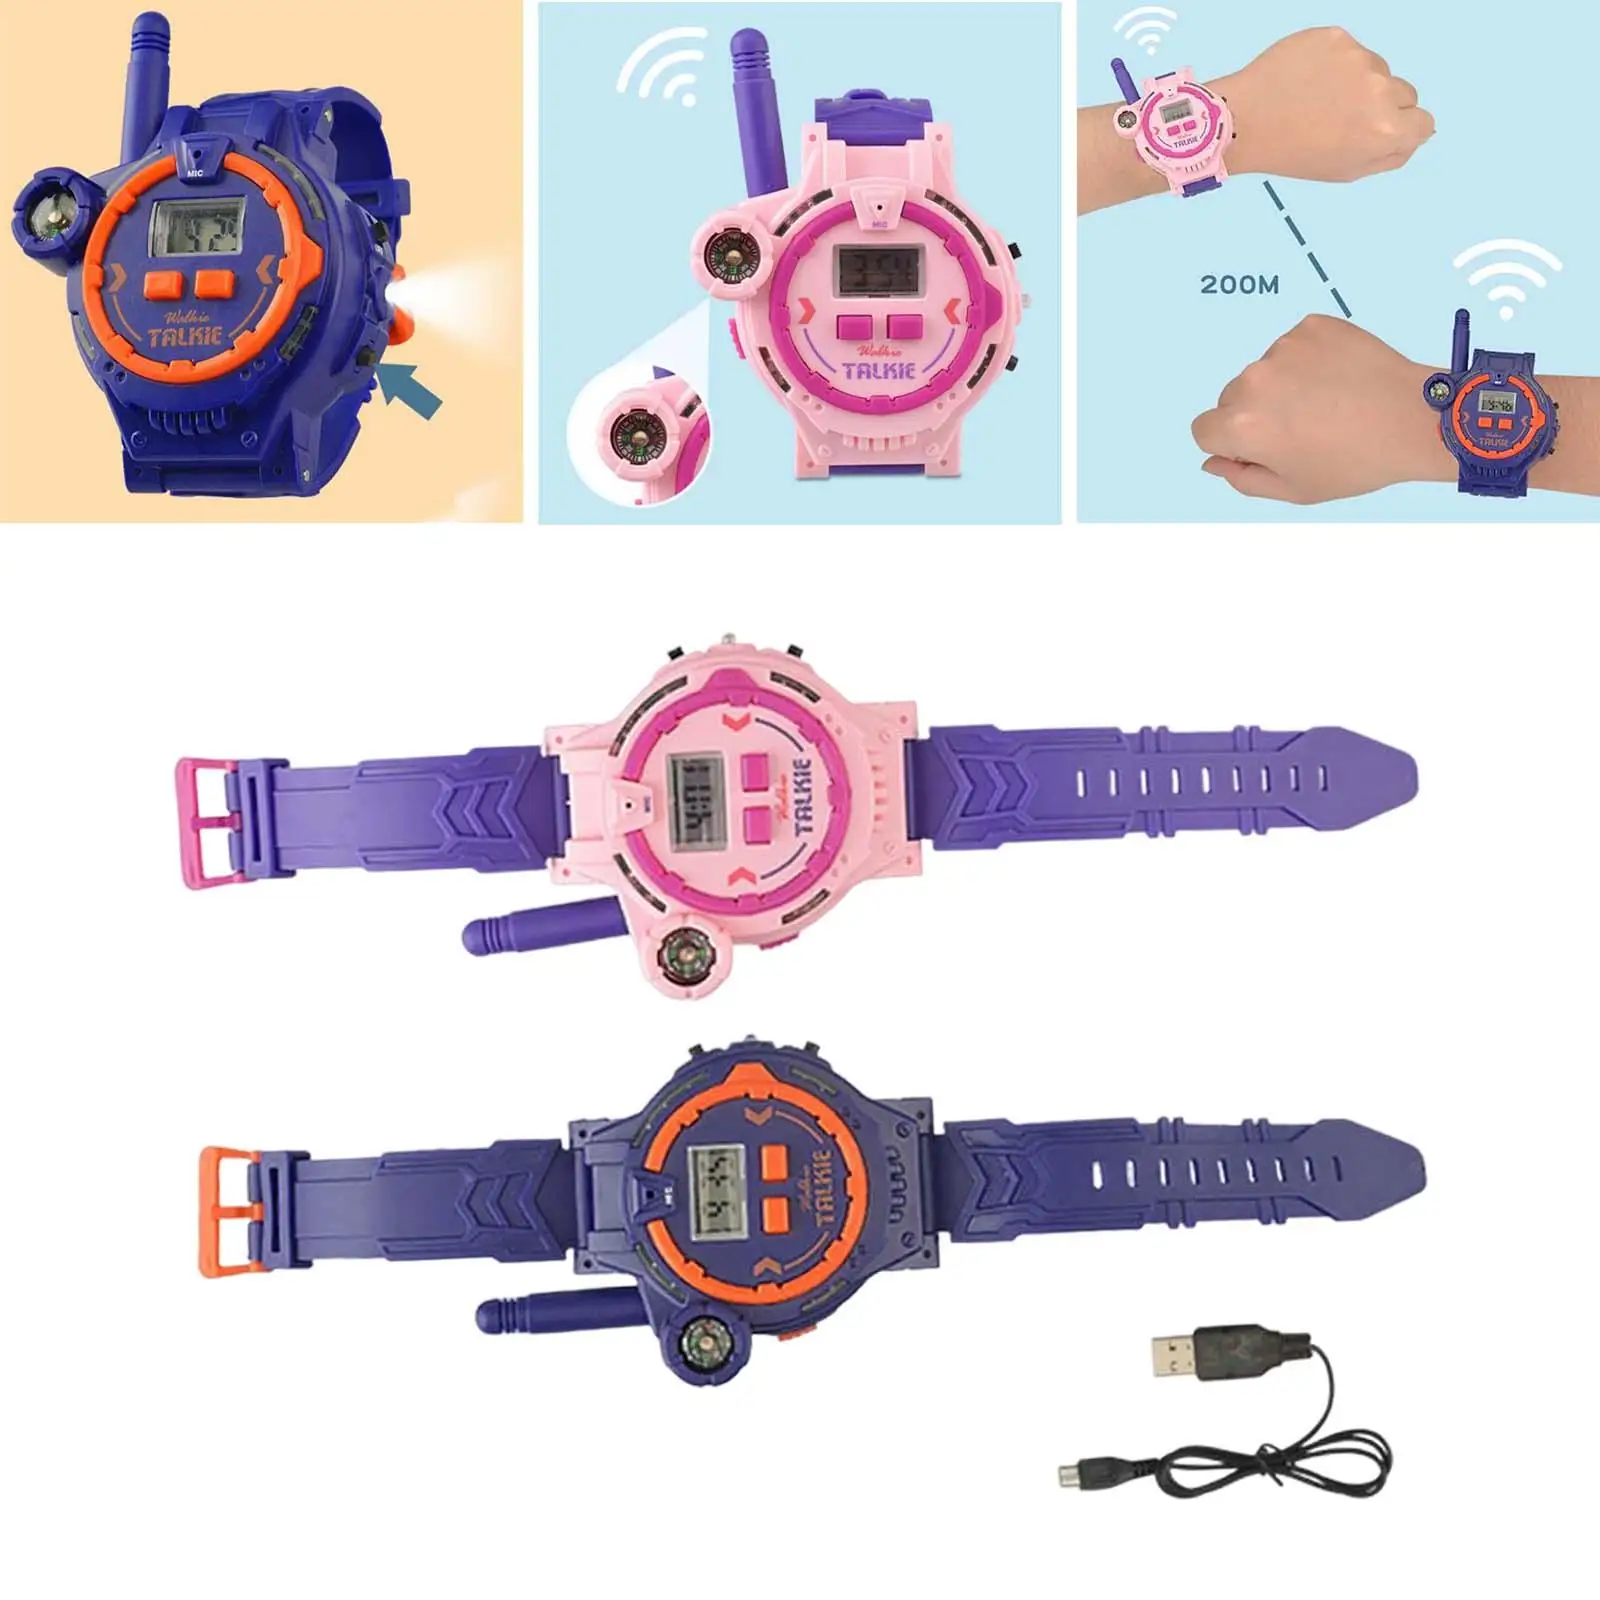  Radios Speaker Watch LED Lights Phone for 3 Ages Boys and Girls Toddler Educational Toys Birthday Gift